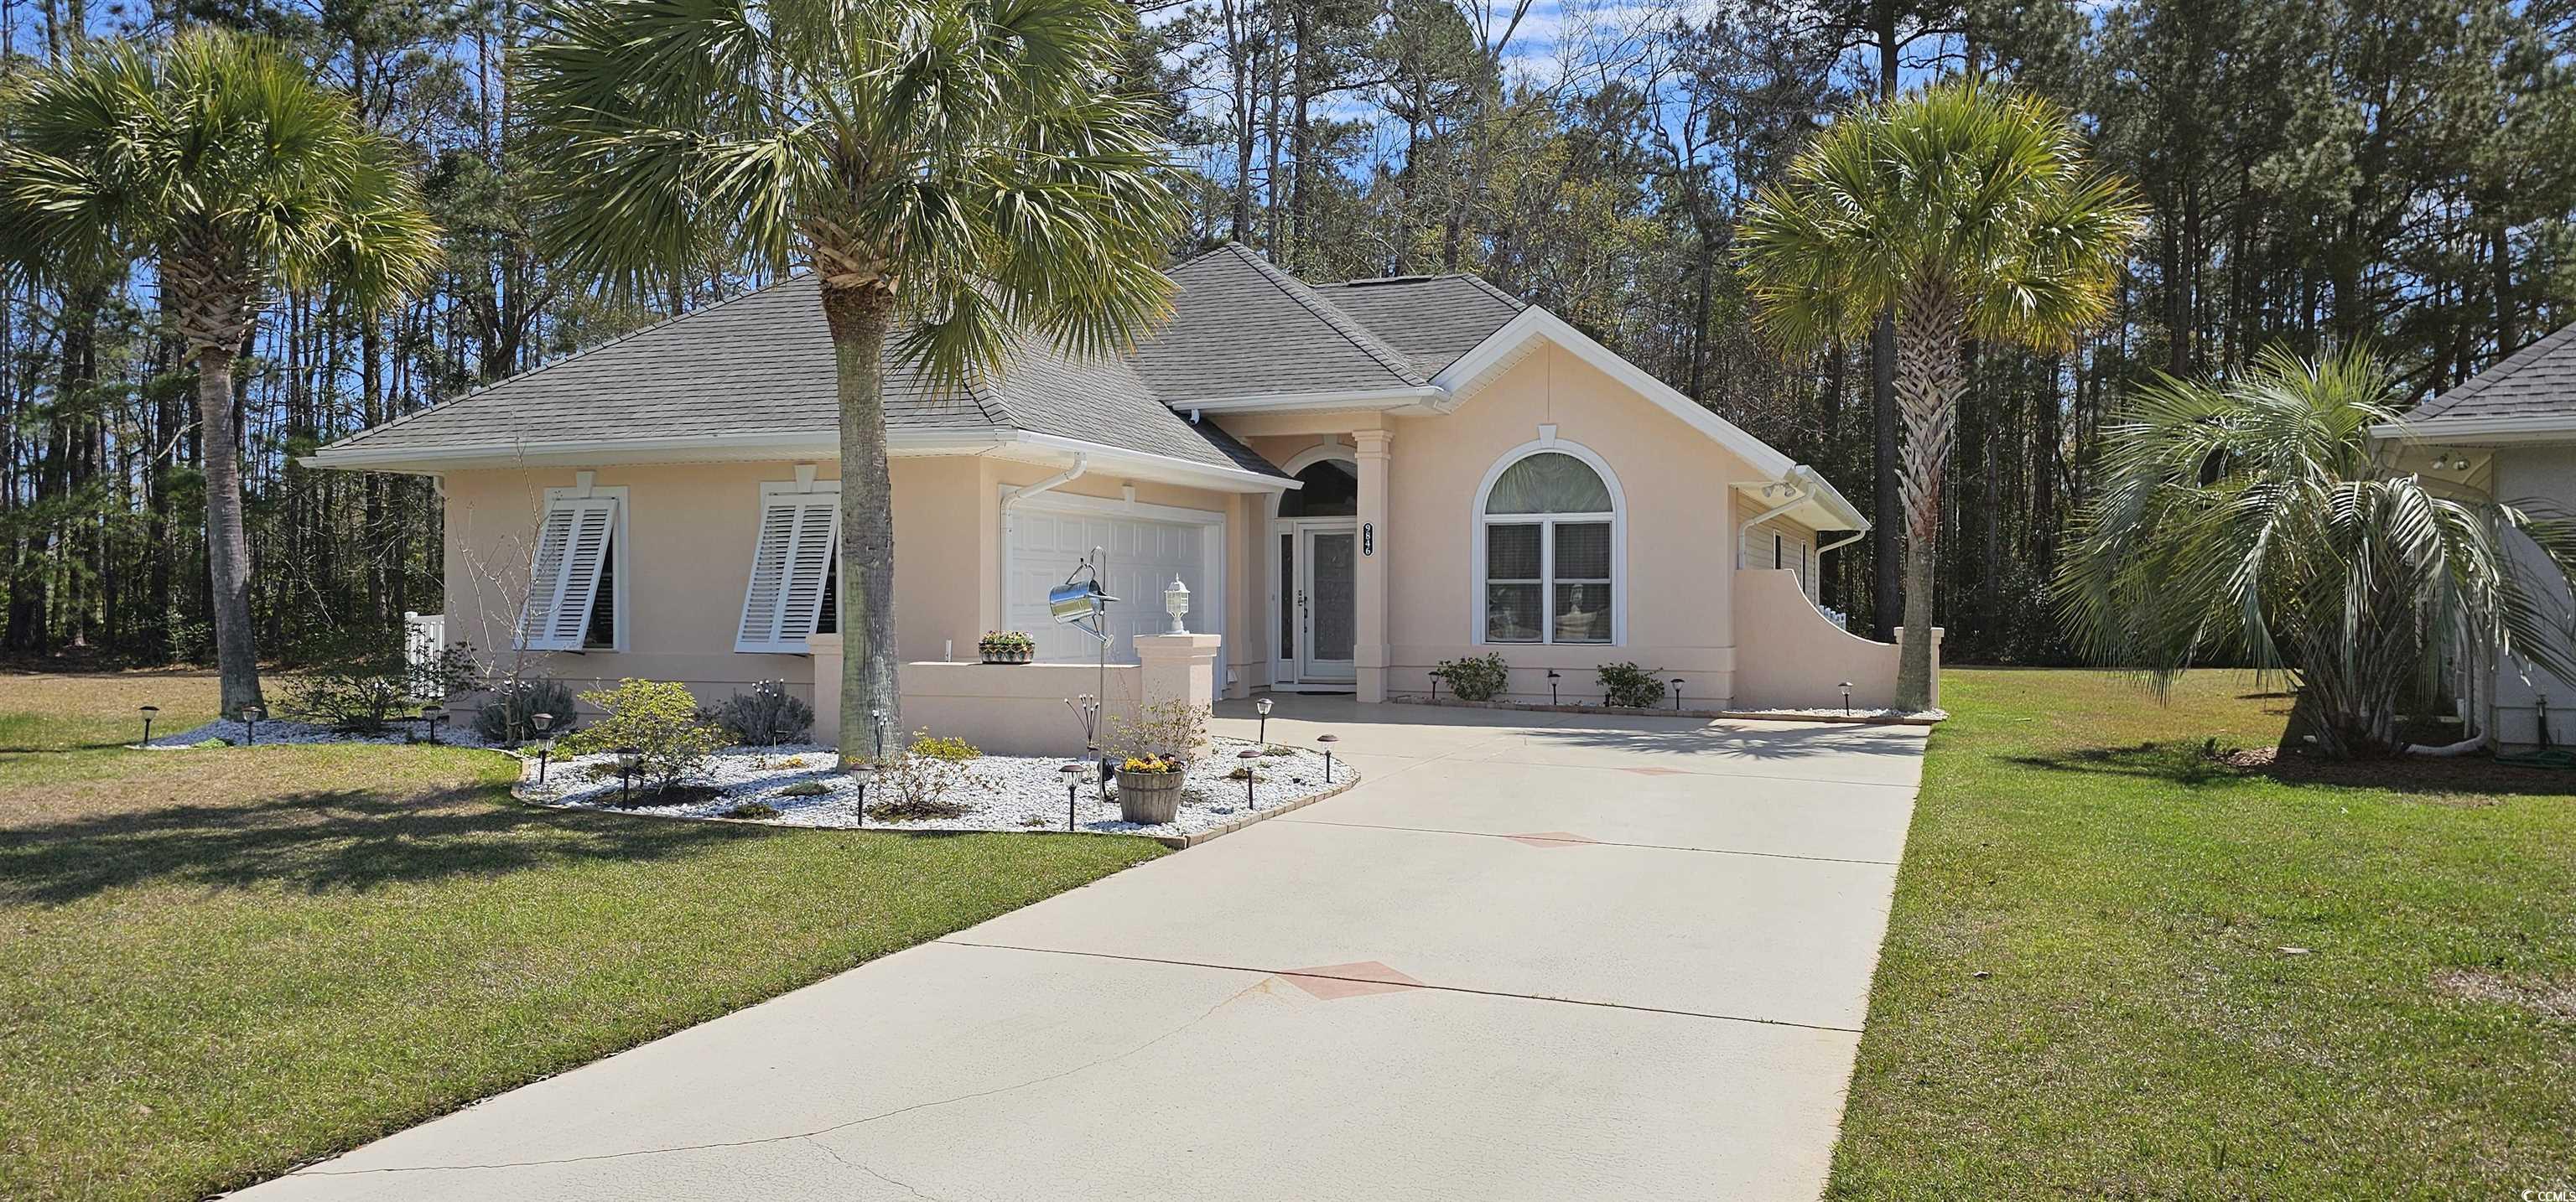 a must see for your forever or 2nd home at the beach! a pristine property that is move-in ready, 3 bedrooms, 2 full baths, one level, 2-car garage, in a cul-de-sac with a fenced yard. located in desirable cypress keyes, with community pool & clubhouse, centrally located in murrells inlet, close to restaurants, shopping, the marshwalk & beaches. open spacious floor plan. amazing large updated kitchen, perfect for entertaining with newer ss appliances, 5 burner, double oven range, 2 pantries, soft-close cabinets & newer quartz countertops. laundry area is conveniently located in kitchen, as well as a utility sink in the garage. both bathrooms have been updated. the master bathroom has a beautifully tiled walk-in shower with seat. the carolina room adds to the spaciousness of the entire living area with newer sliding door to your private large, 3-season room with vaulted ceiling, for morning coffee, afternoon bird watching or reading & evening relaxation. home includes newer pella windows, hunter douglas wooden blinds, hunter fans, hickory hardwood engineered floors thru-out home & no popcorn ceilings. hoa fee includes basic cable & trash pickup. all measurements are approximate & should be verified by buyer.